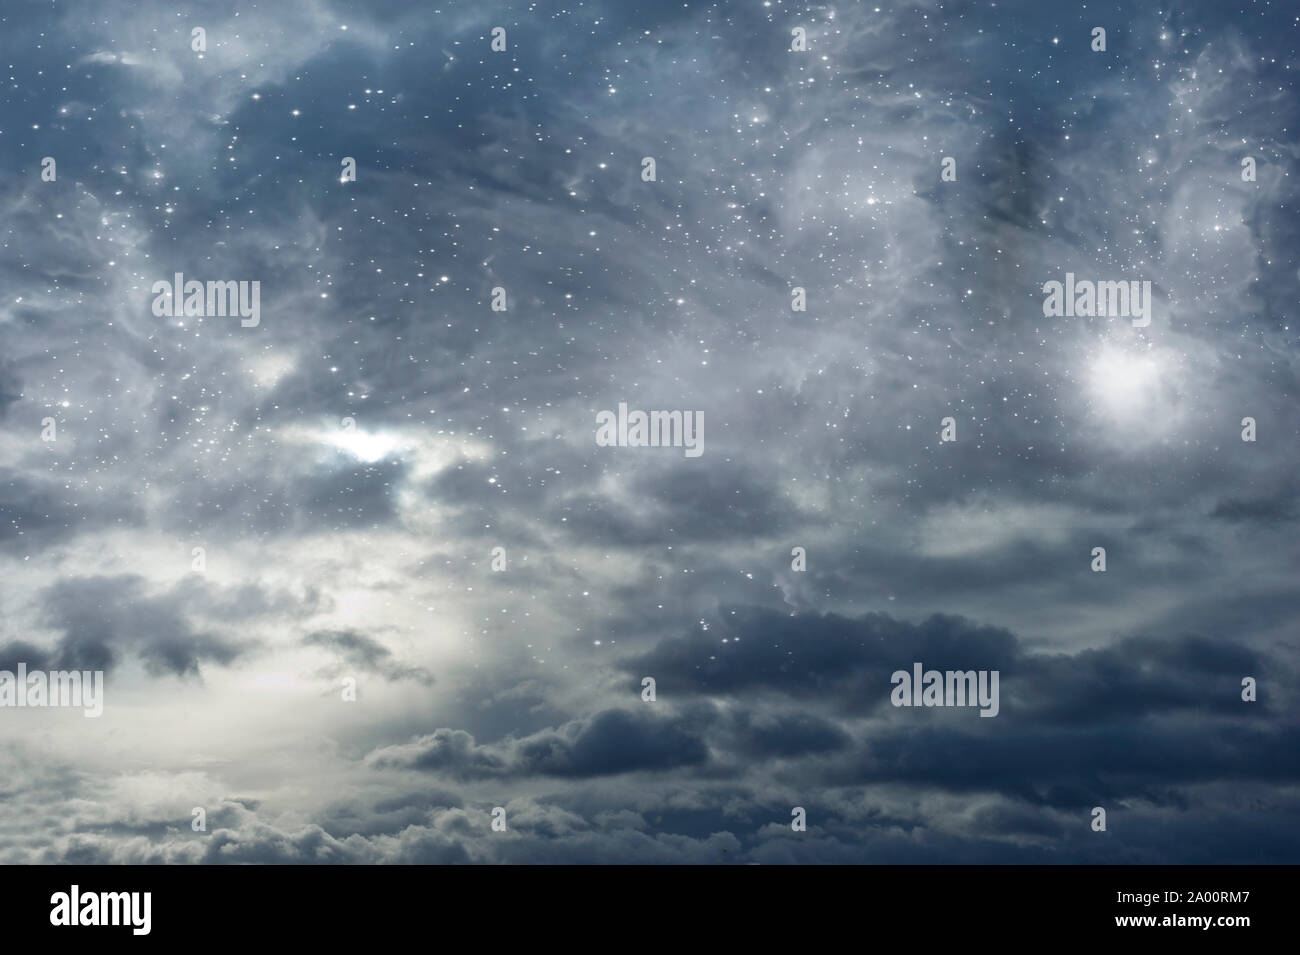 mystical background of clouds and stars with copy space Stock Photo